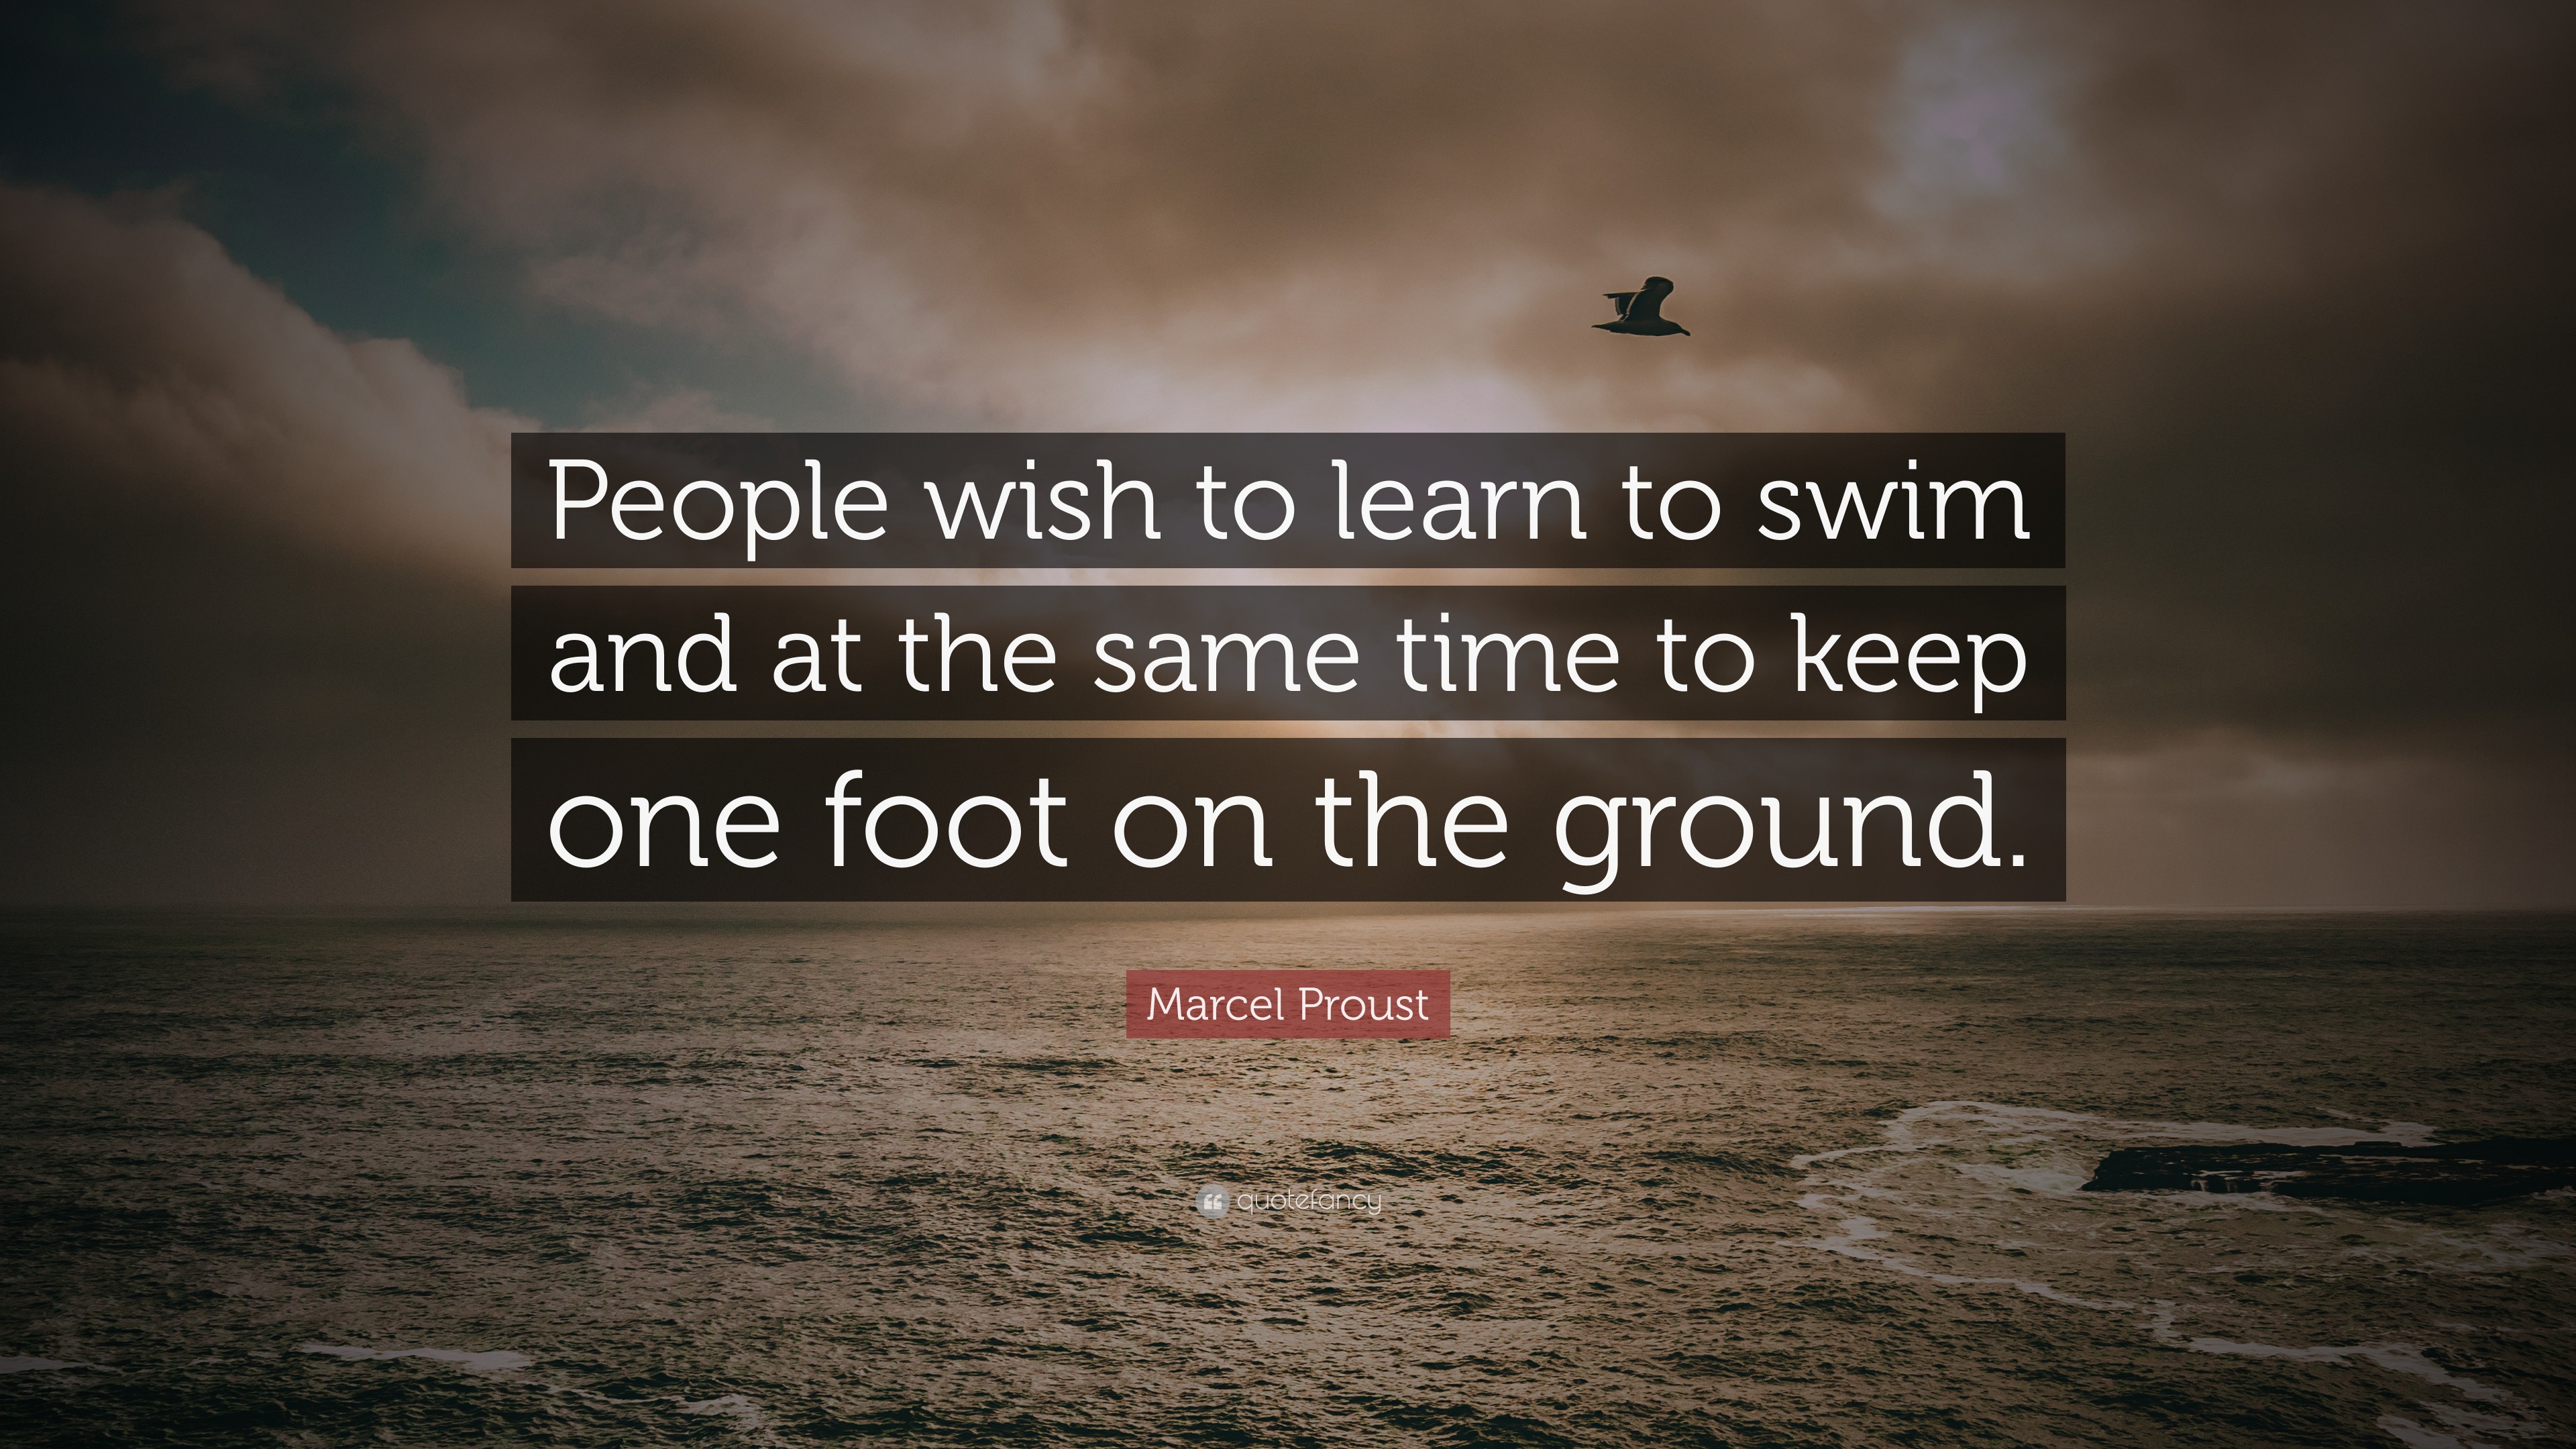 Marcel Proust Quote: “People wish to learn to swim and at the same